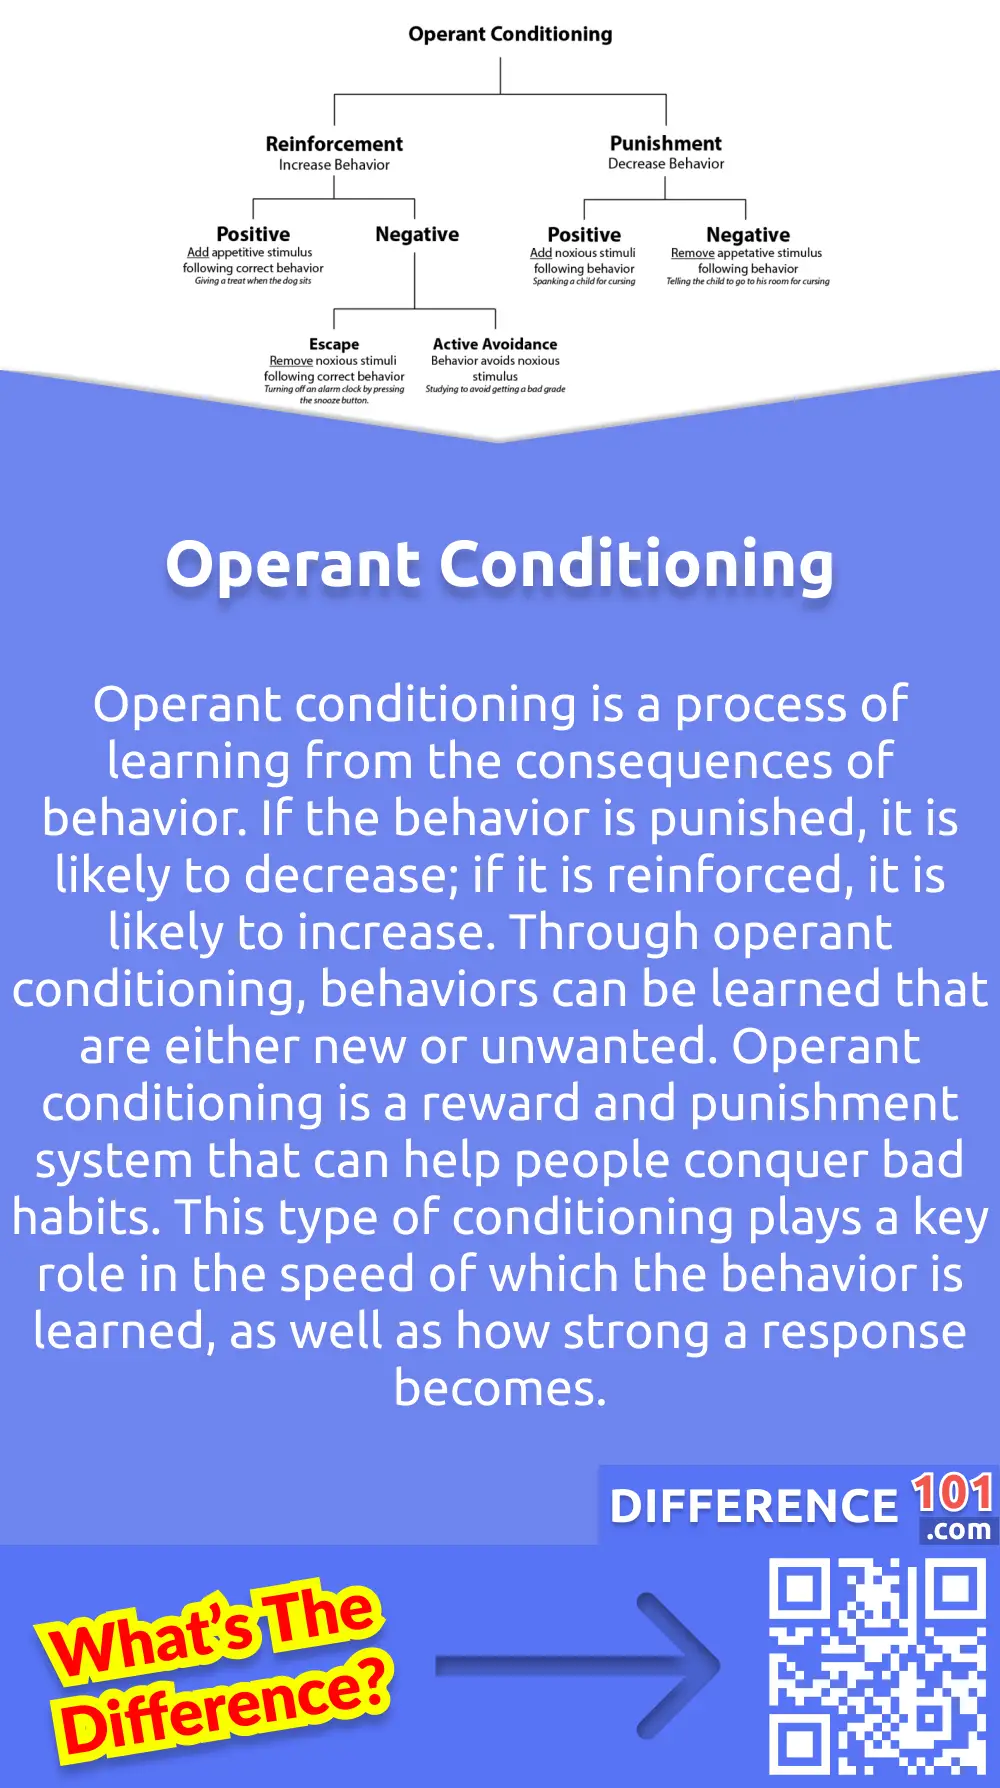 What Is Operant Conditioning? Operant conditioning is a process of learning from the consequences of behavior. If the behavior is punished, it is likely to decrease; if it is reinforced, it is likely to increase. Through operant conditioning, behaviors can be learned that are either new or unwanted. Operant conditioning is a reward and punishment system that can help people conquer bad habits. This type of conditioning plays a key role in the speed of which the behavior is learned, as well as how strong a response becomes.